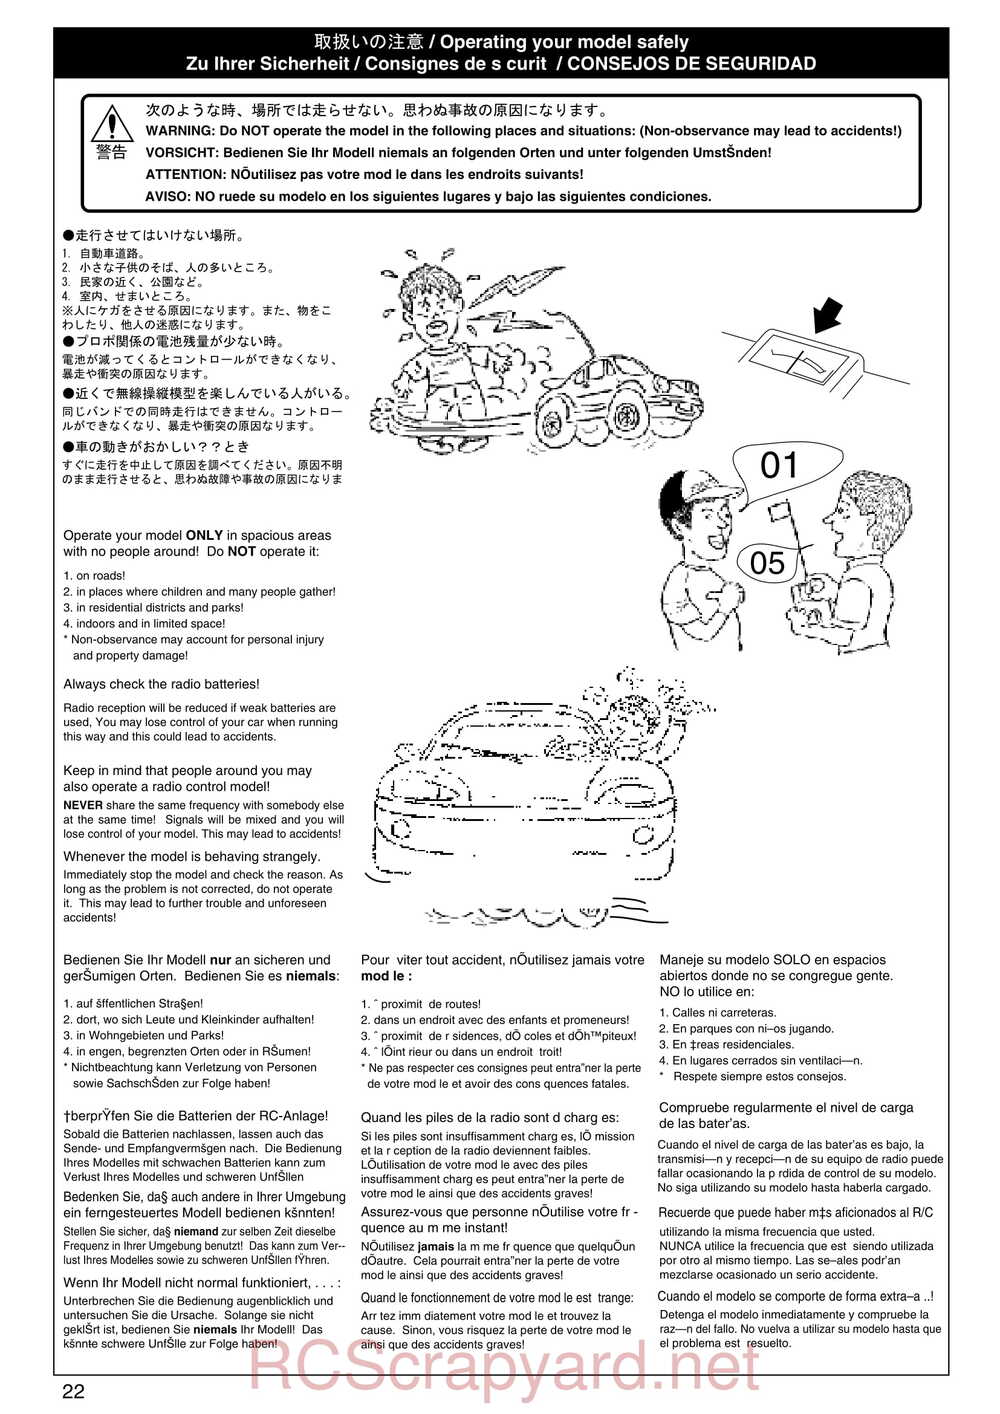 Kyosho - 30072 - EP-Ultima-RB-Racing-Sports - Manual - Page 22